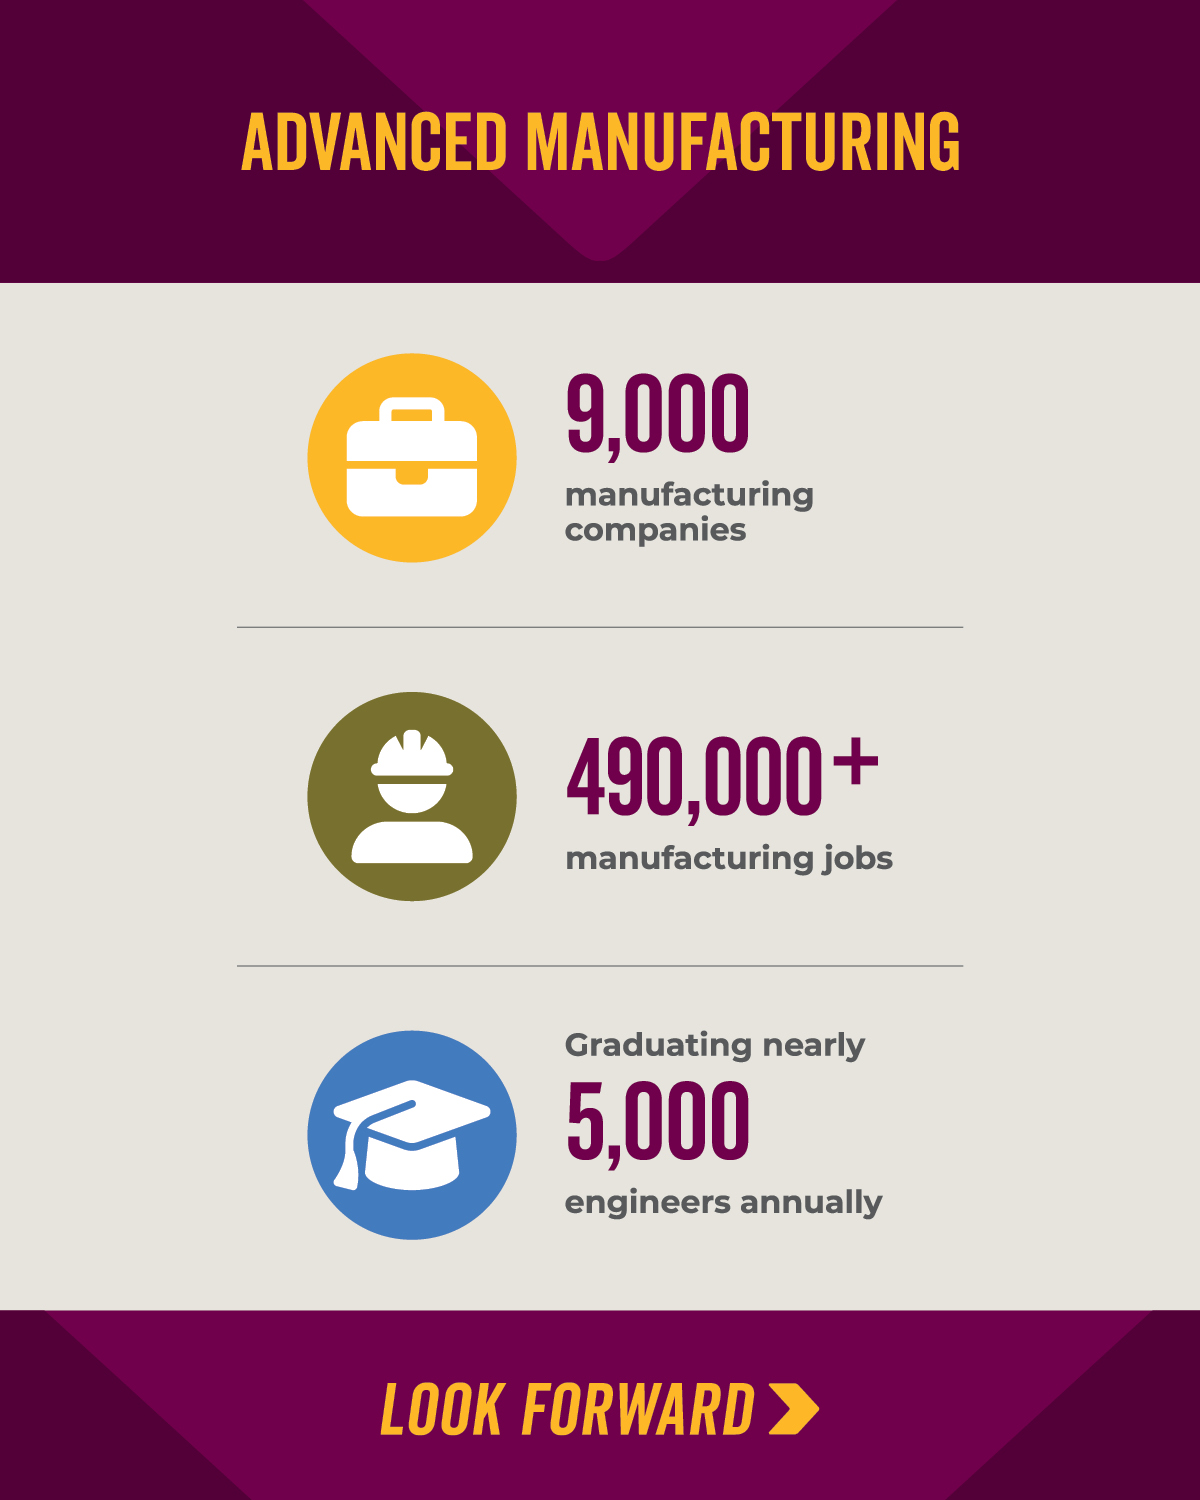 This graphic highlights some of the key data-points of the manufacturing industry in Wisconsin -- including 9,000 manufacturing companies, 490,000 jobs, and 5,000 engineers graduate each year in Wisconsin.